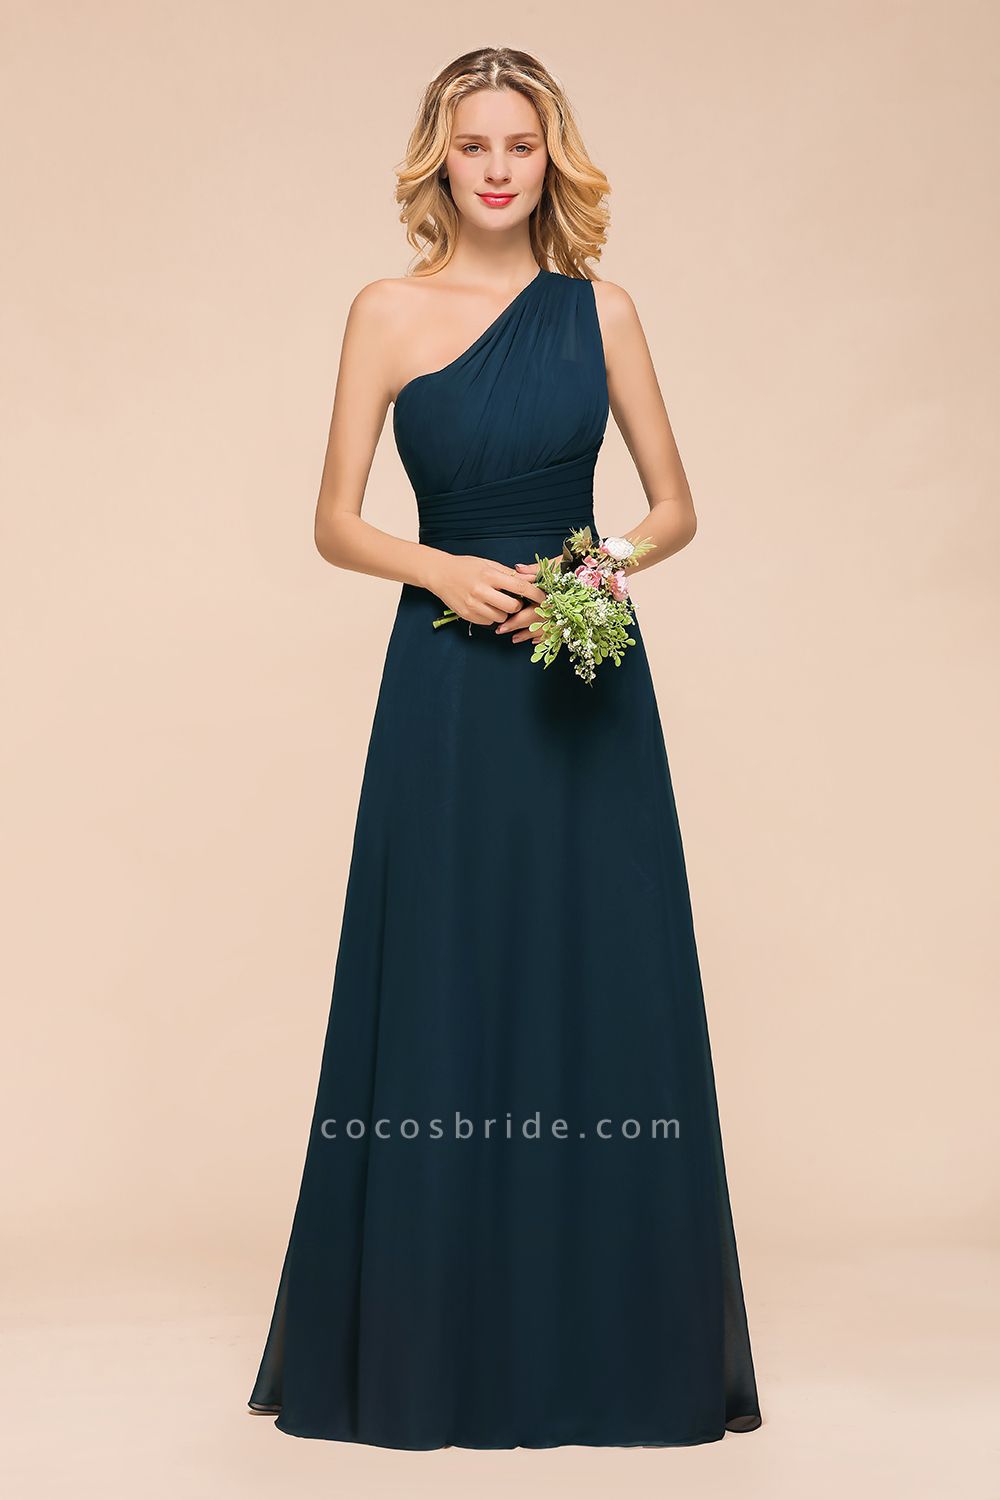 Simple One Shoulder A-line Floor-length Chiffon Bridesmaid Dress With Ruched